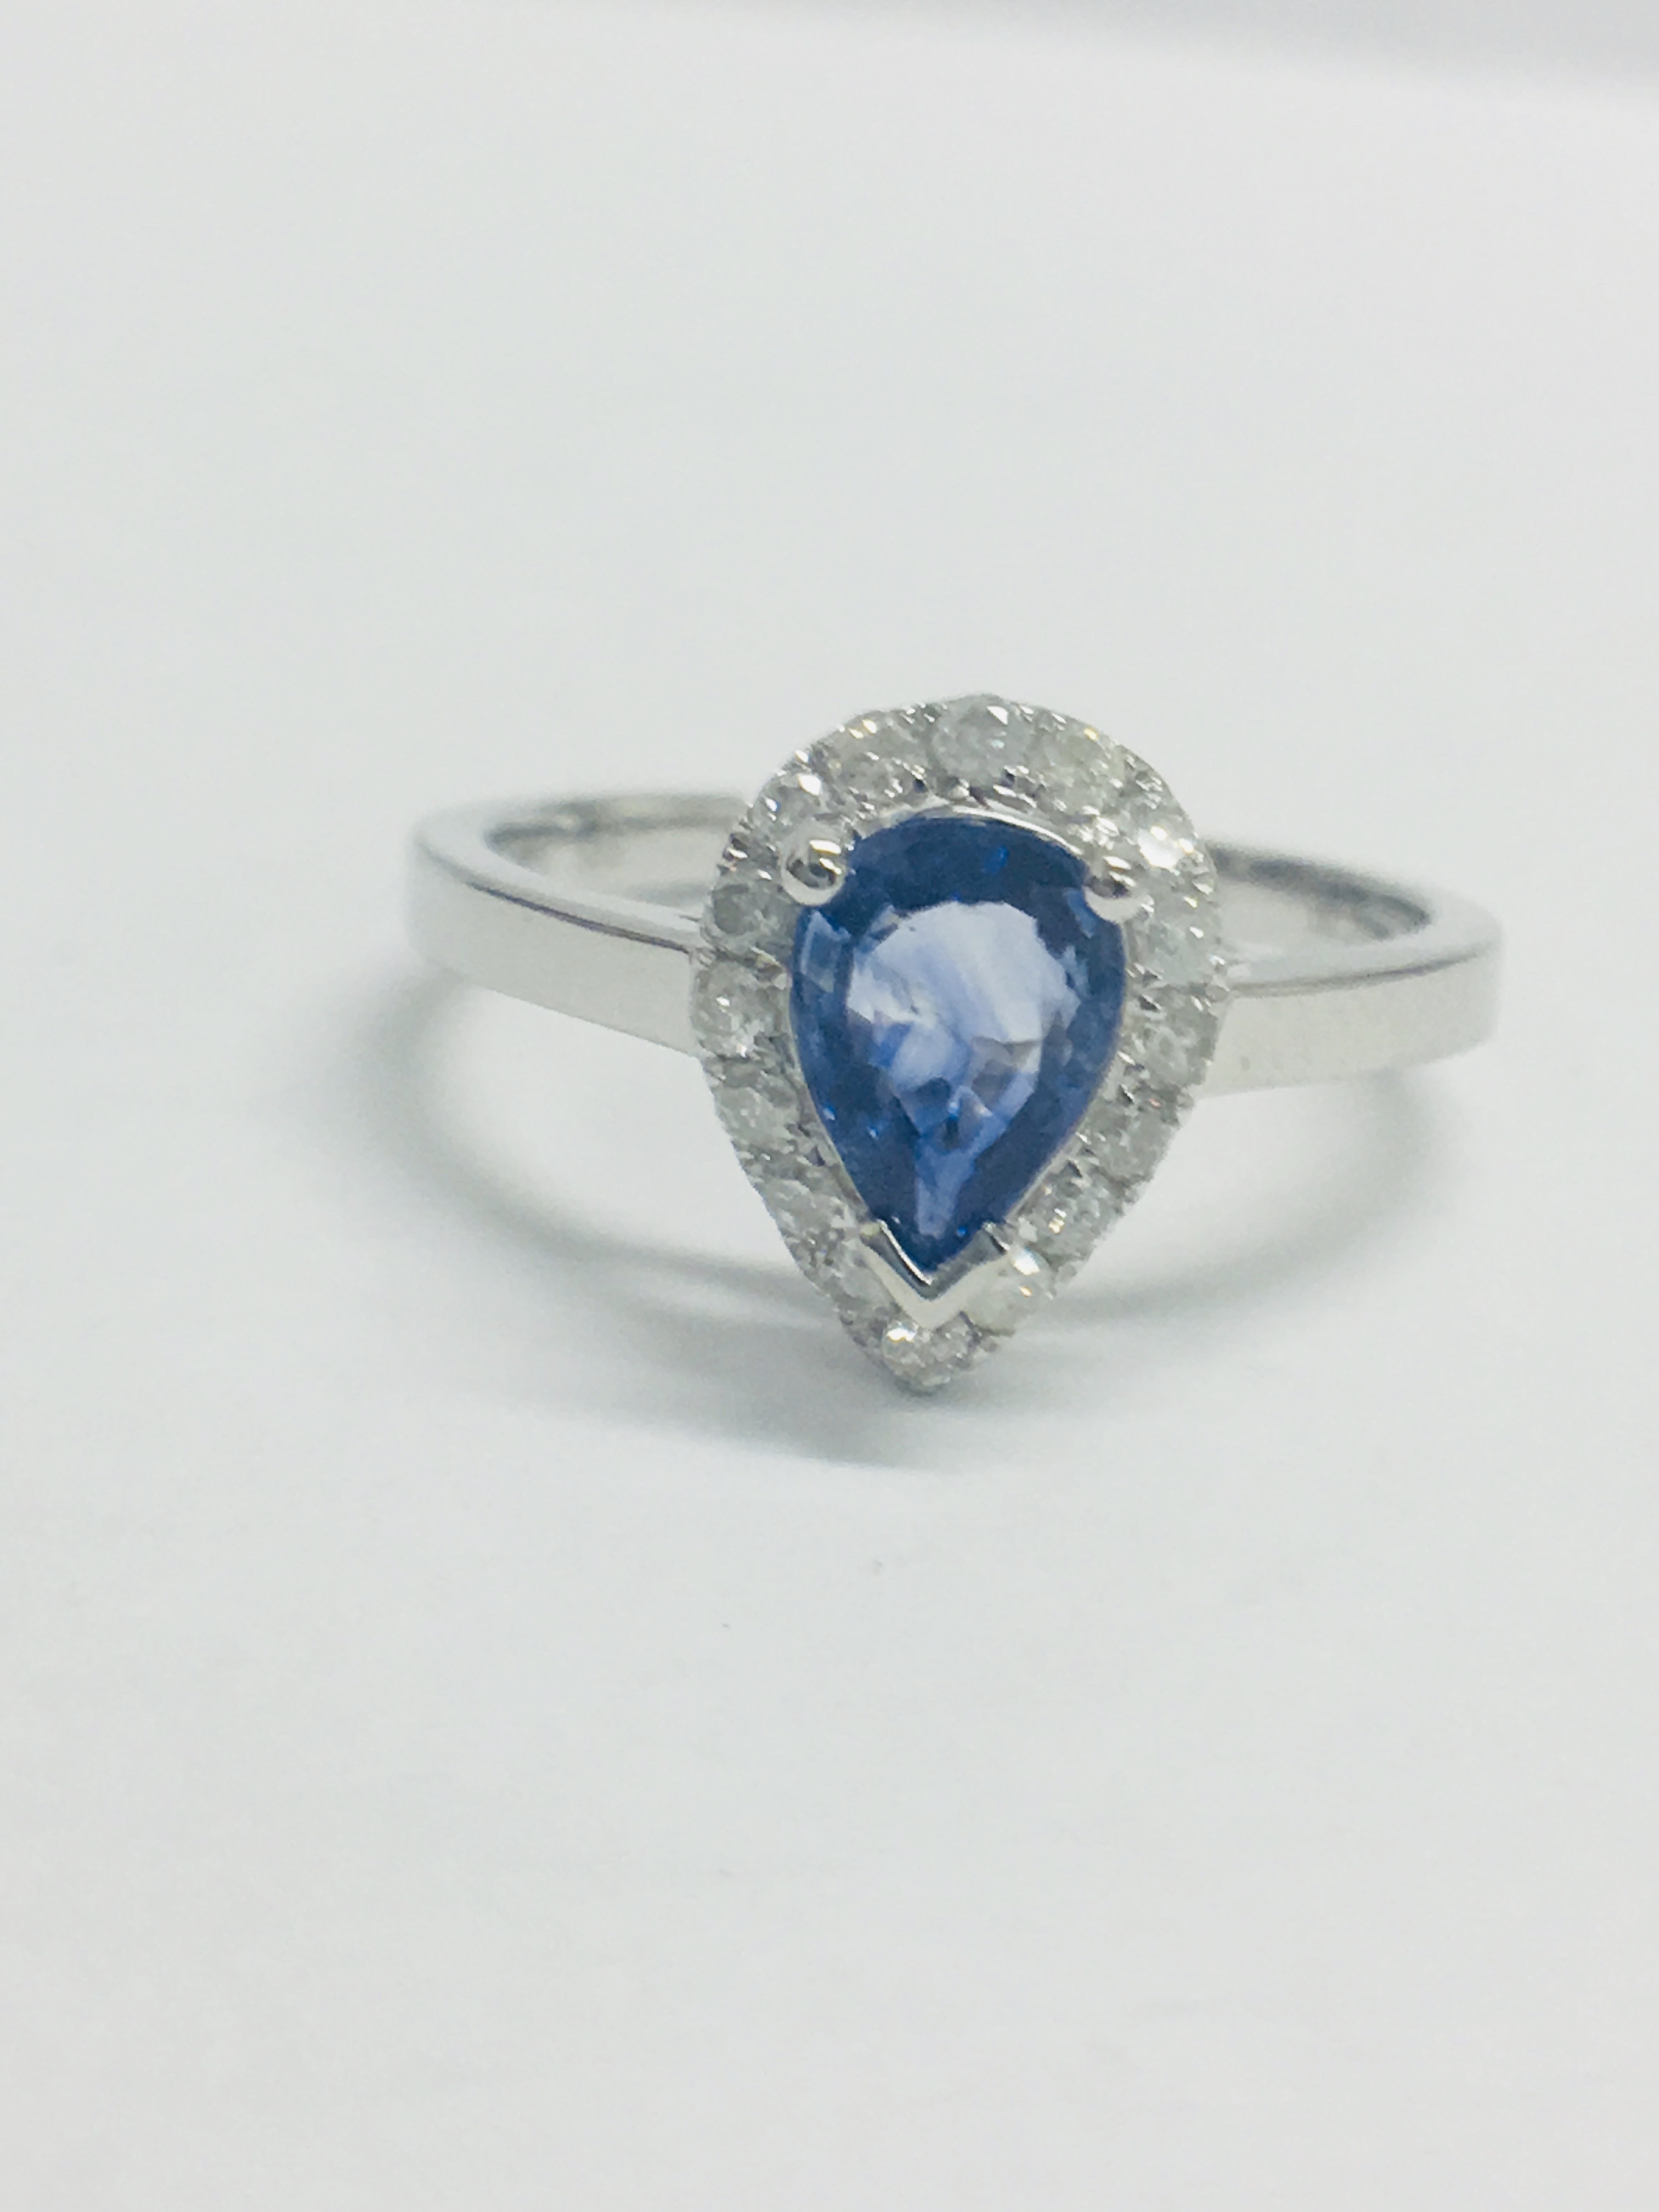 14Ct White Gold Sapphire And Diamond Ring. - Image 8 of 10